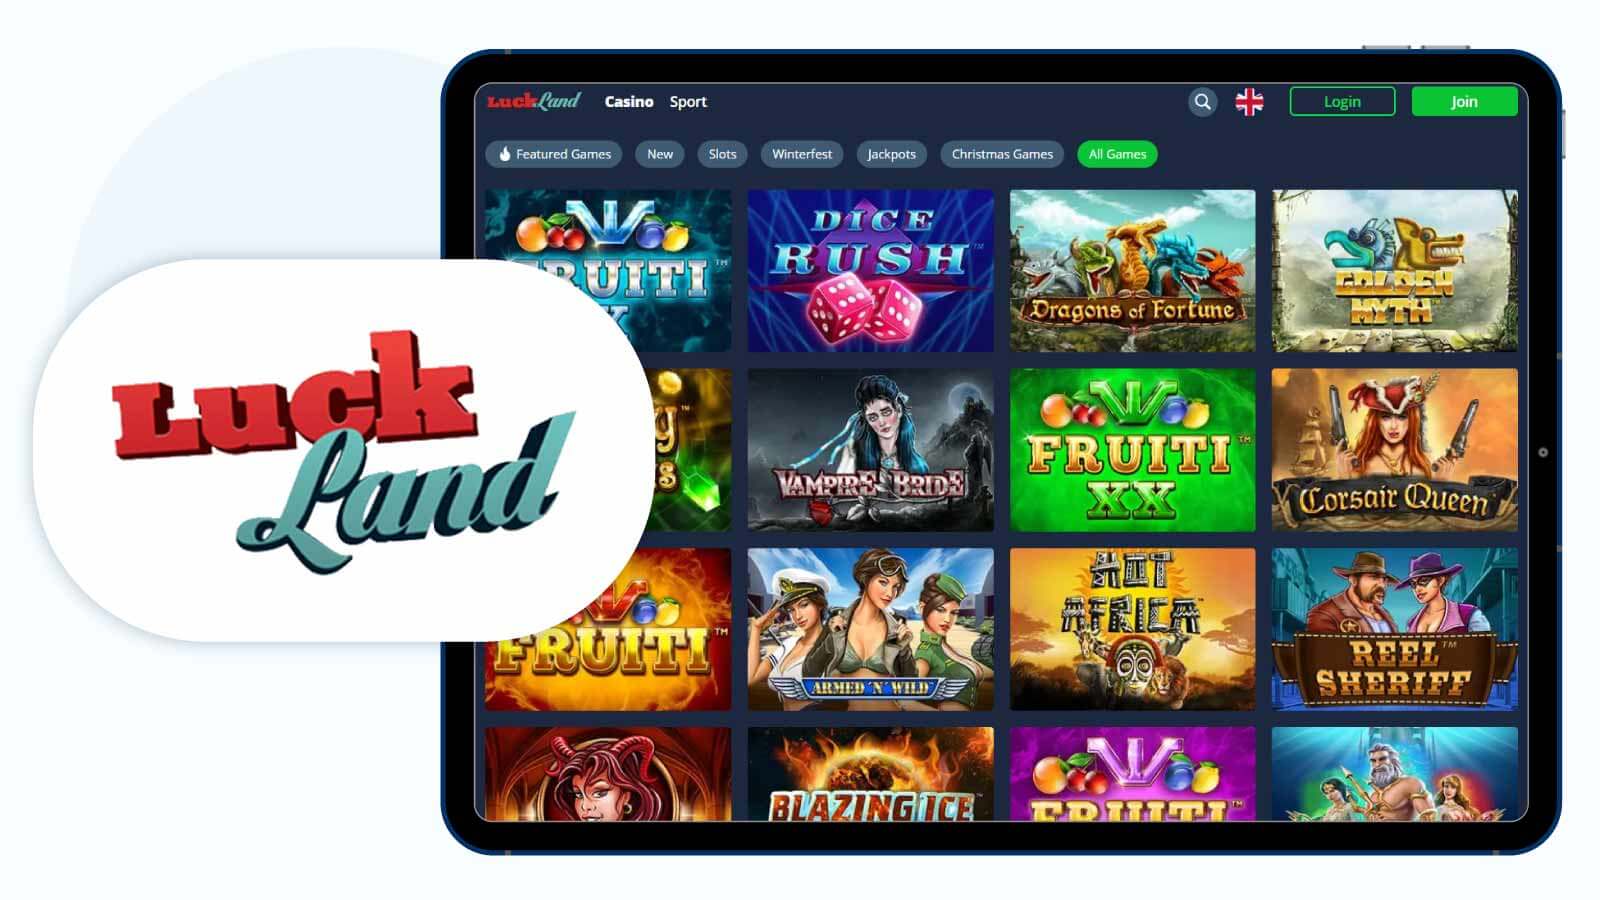 LuckLand Casino Best Live Craps Streaming